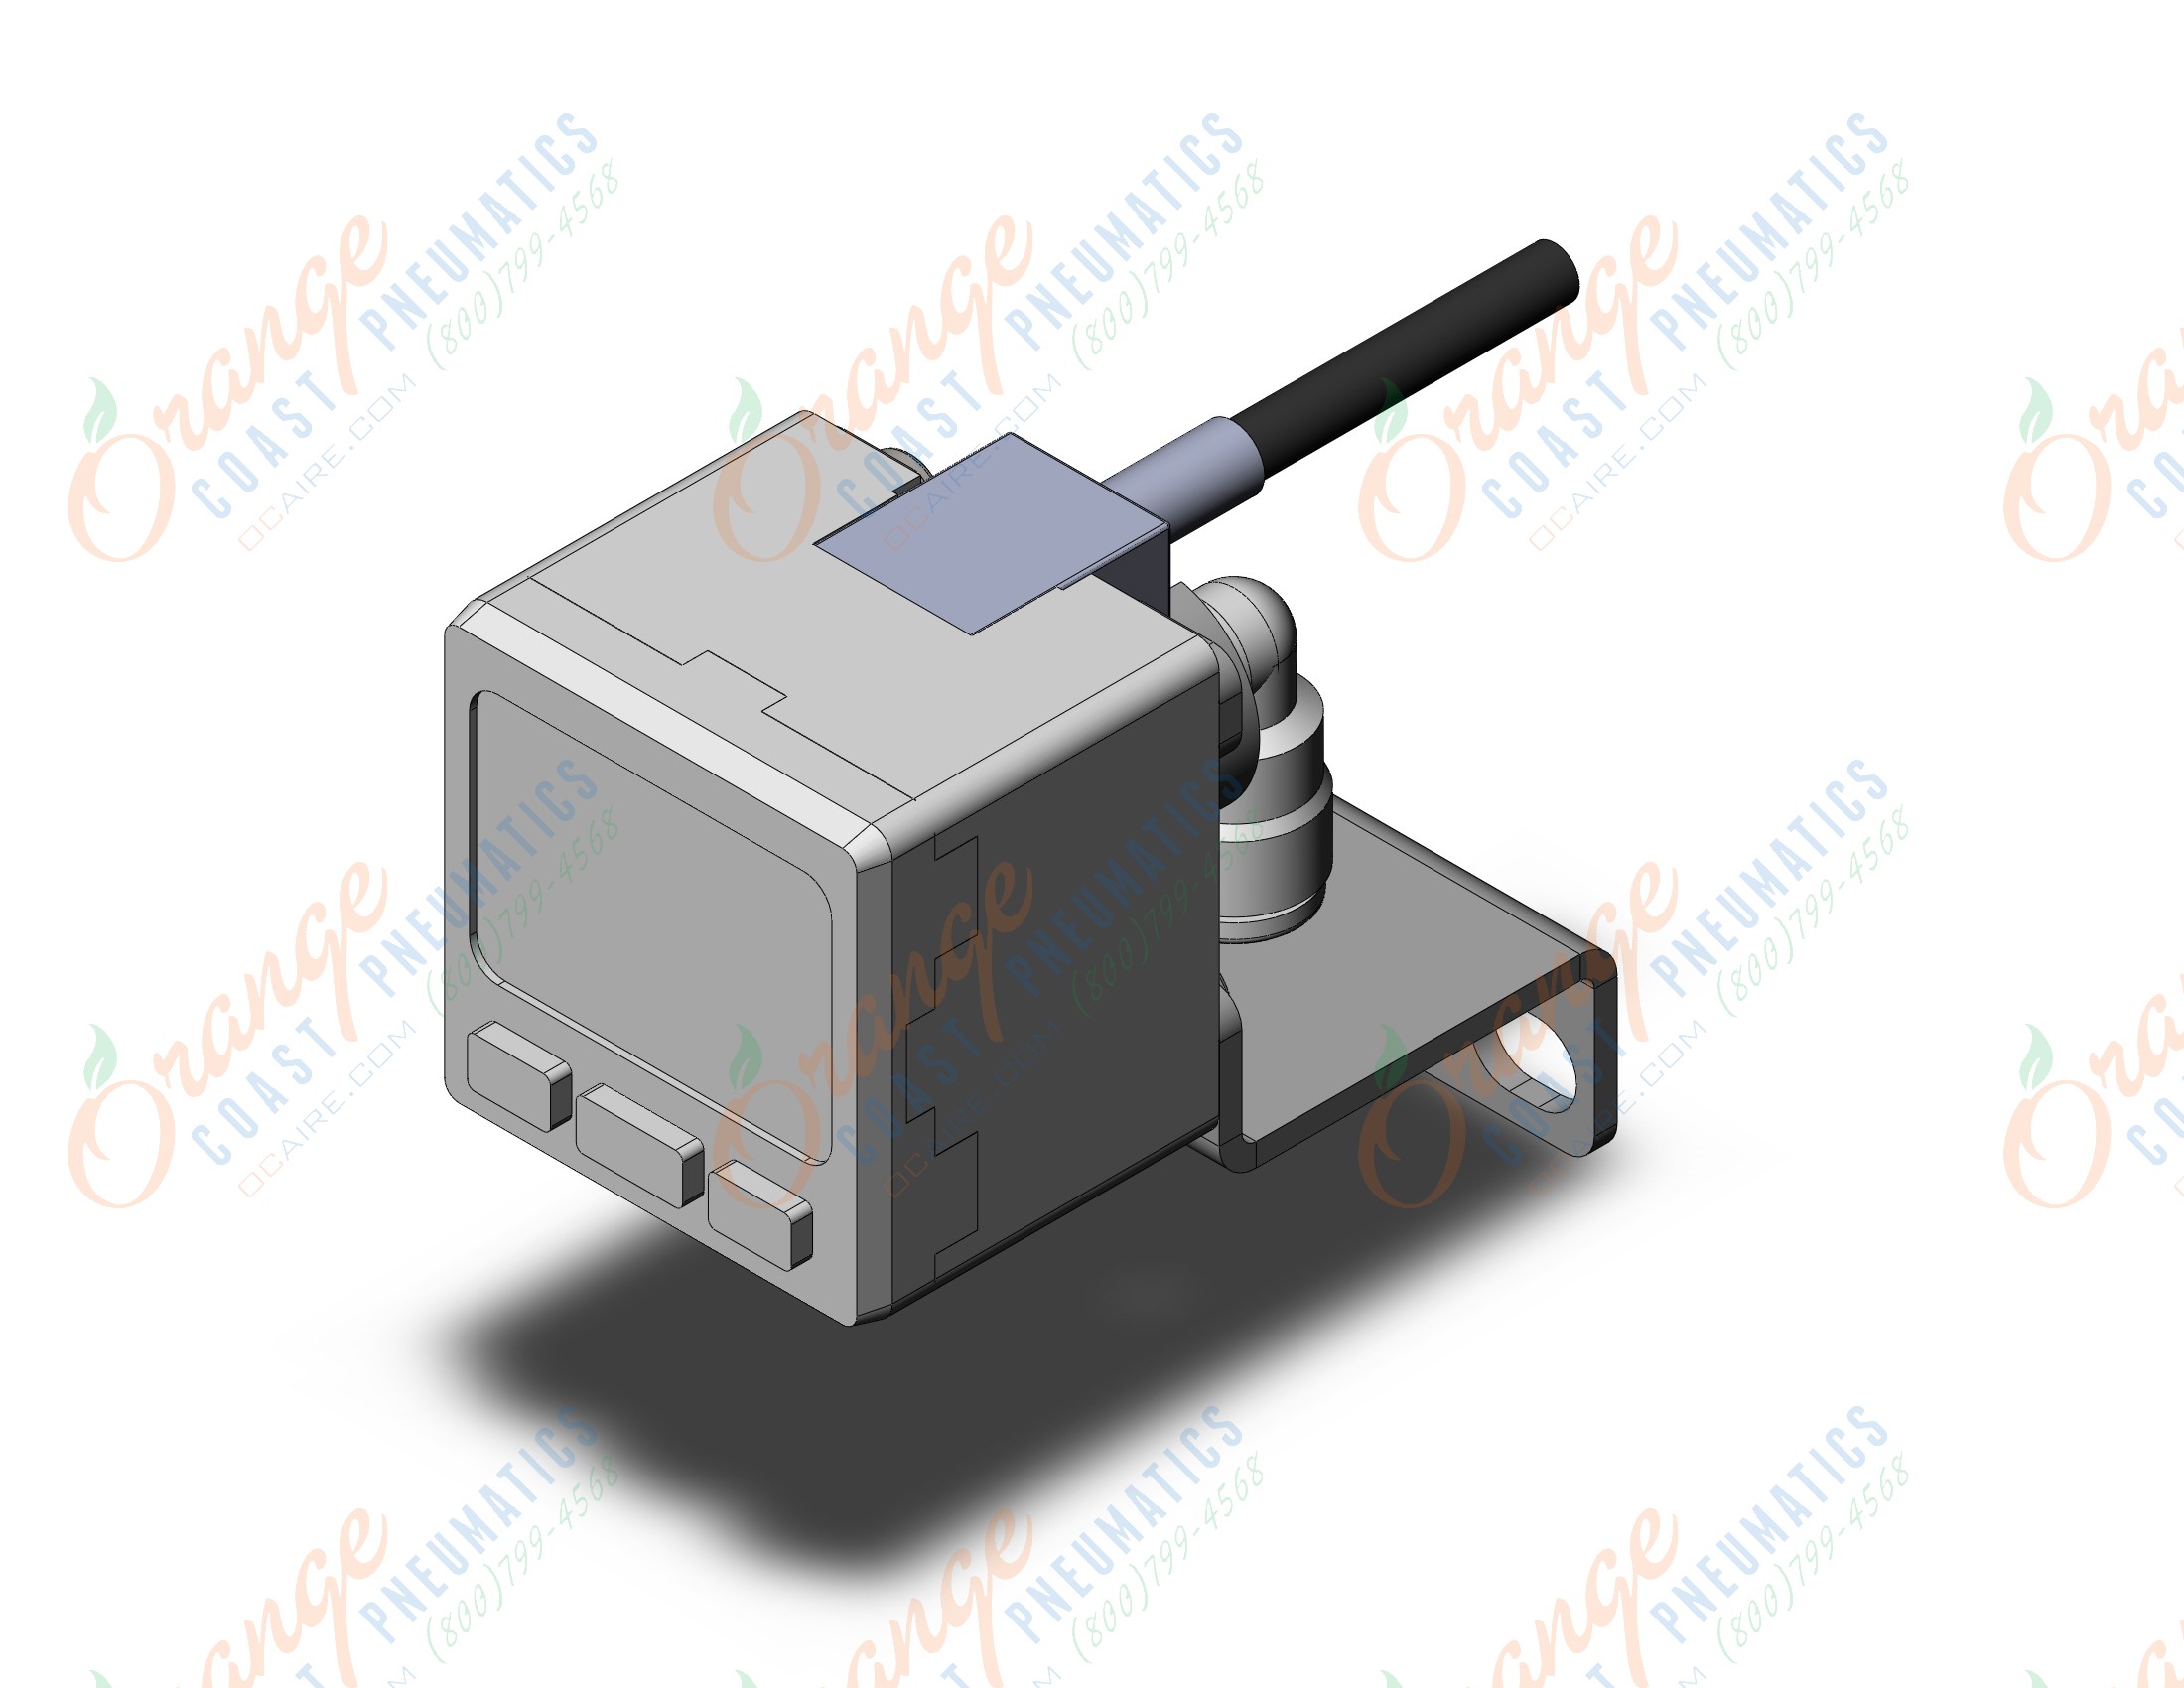 SMC ISE30A-C4L-B-GA2-X510 2 color high precision dig pres switch, PRESSURE SWITCH, ISE30, ISE30A